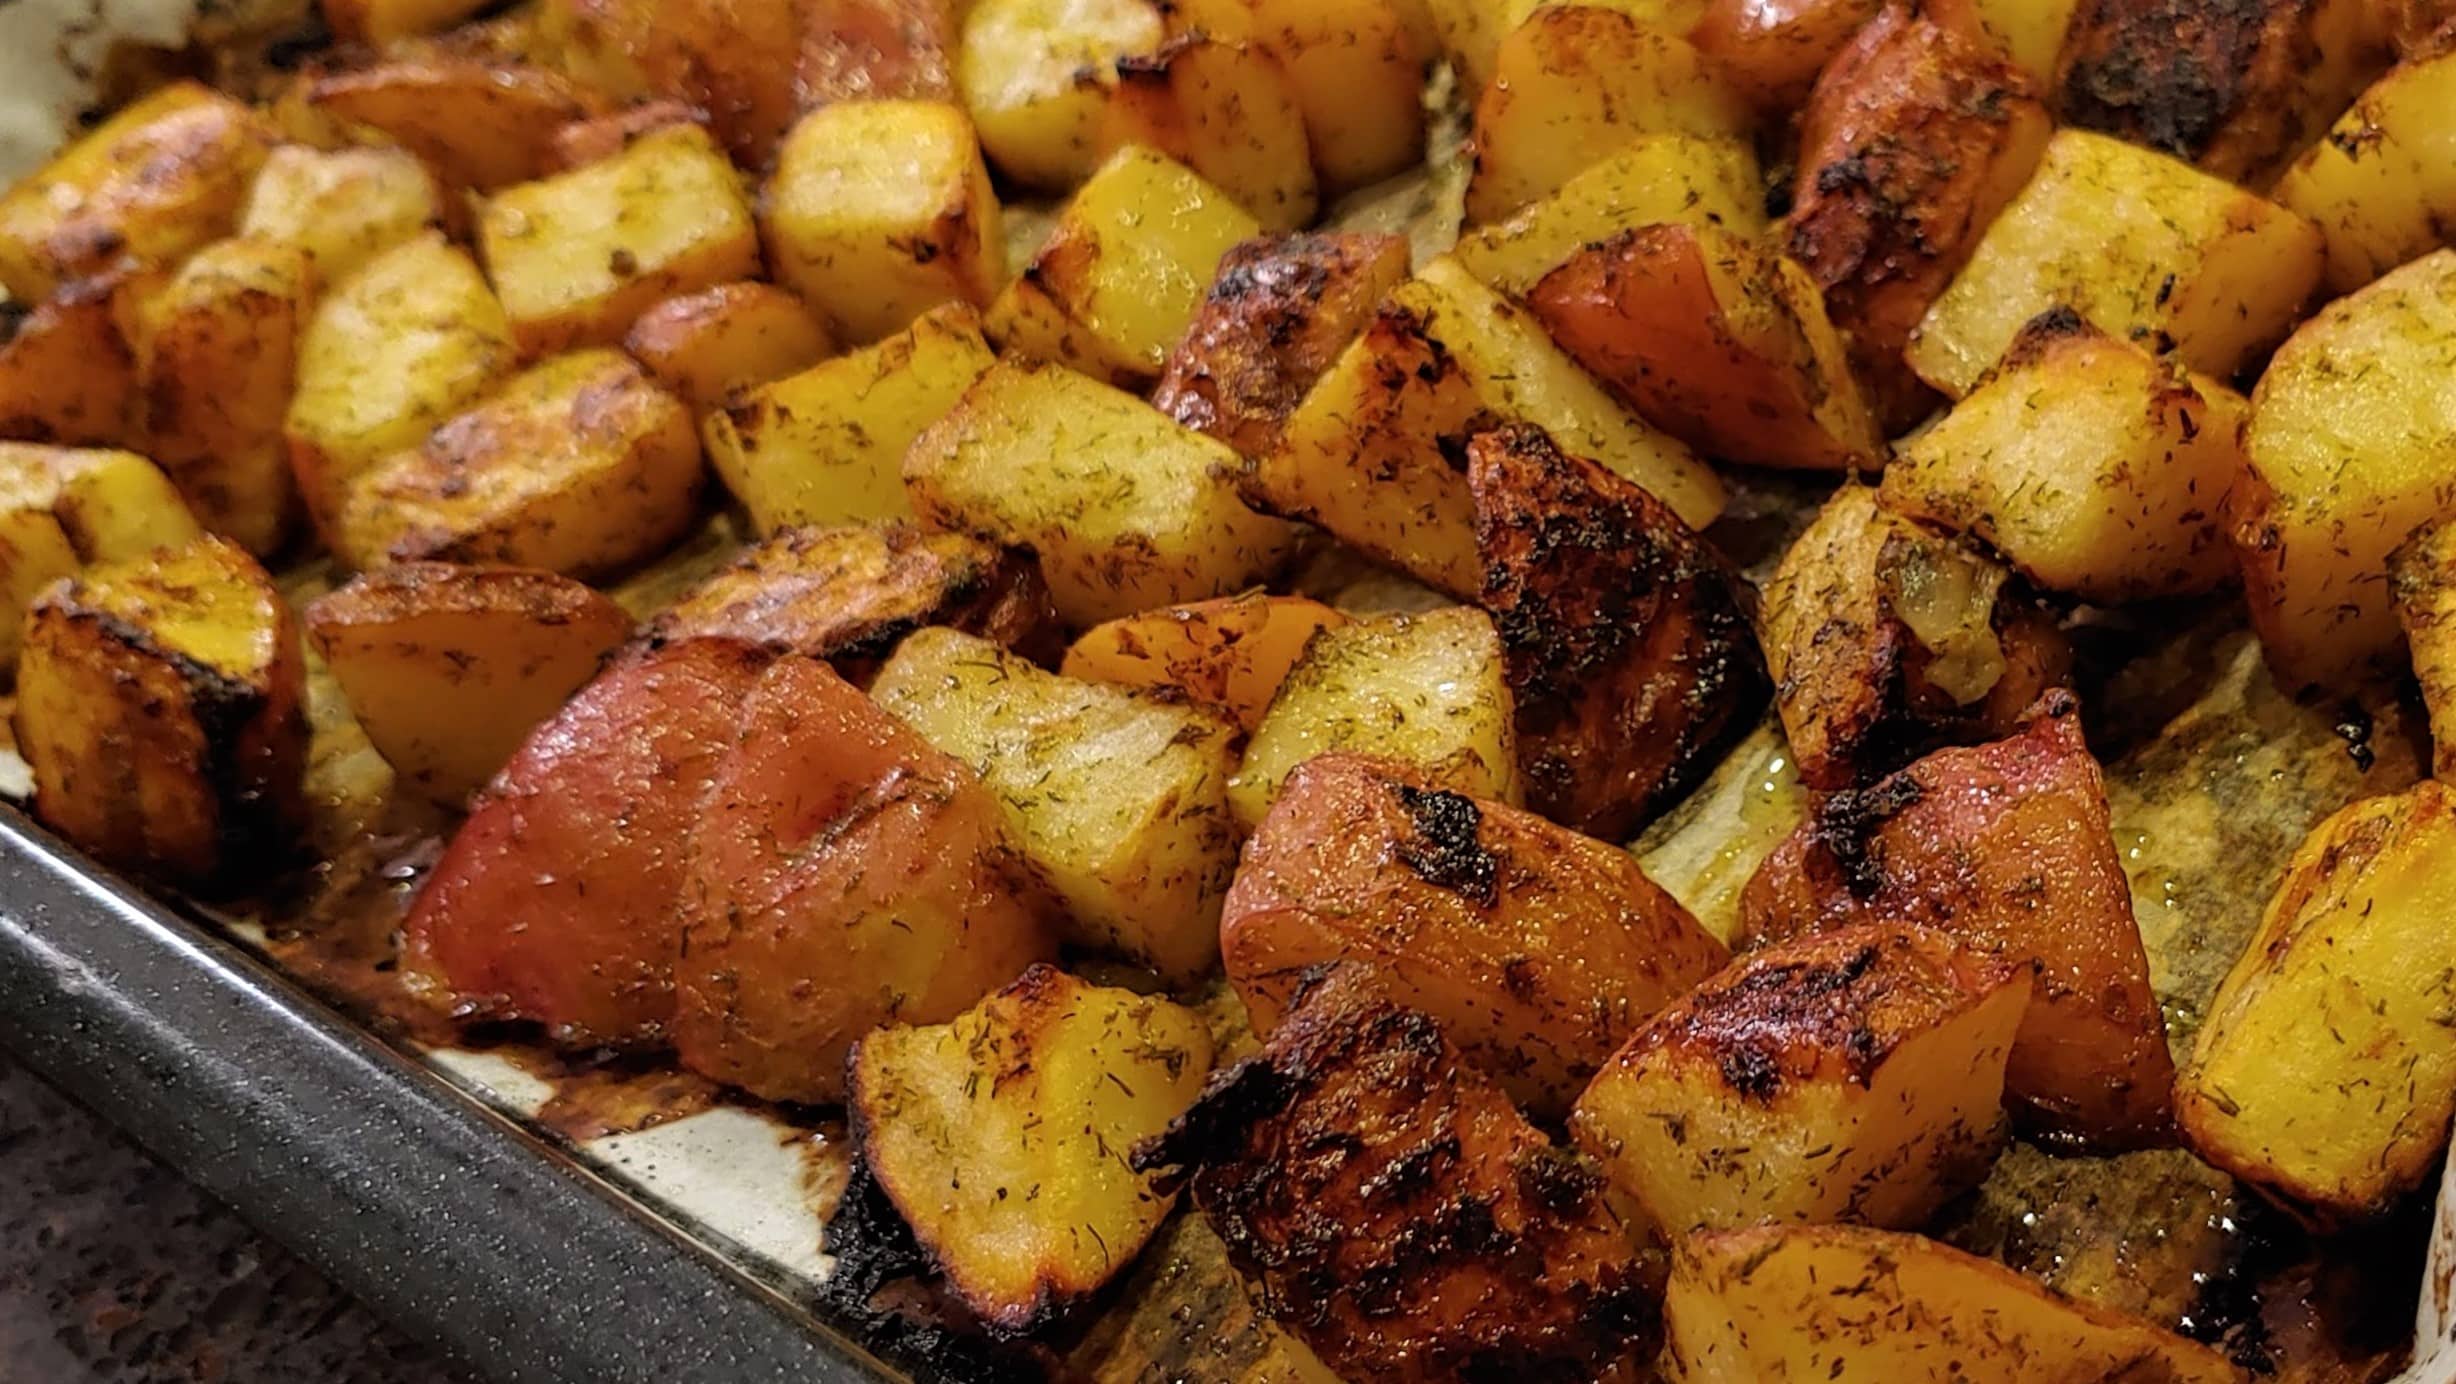 Roasted potatoes - Dining in with Danielle